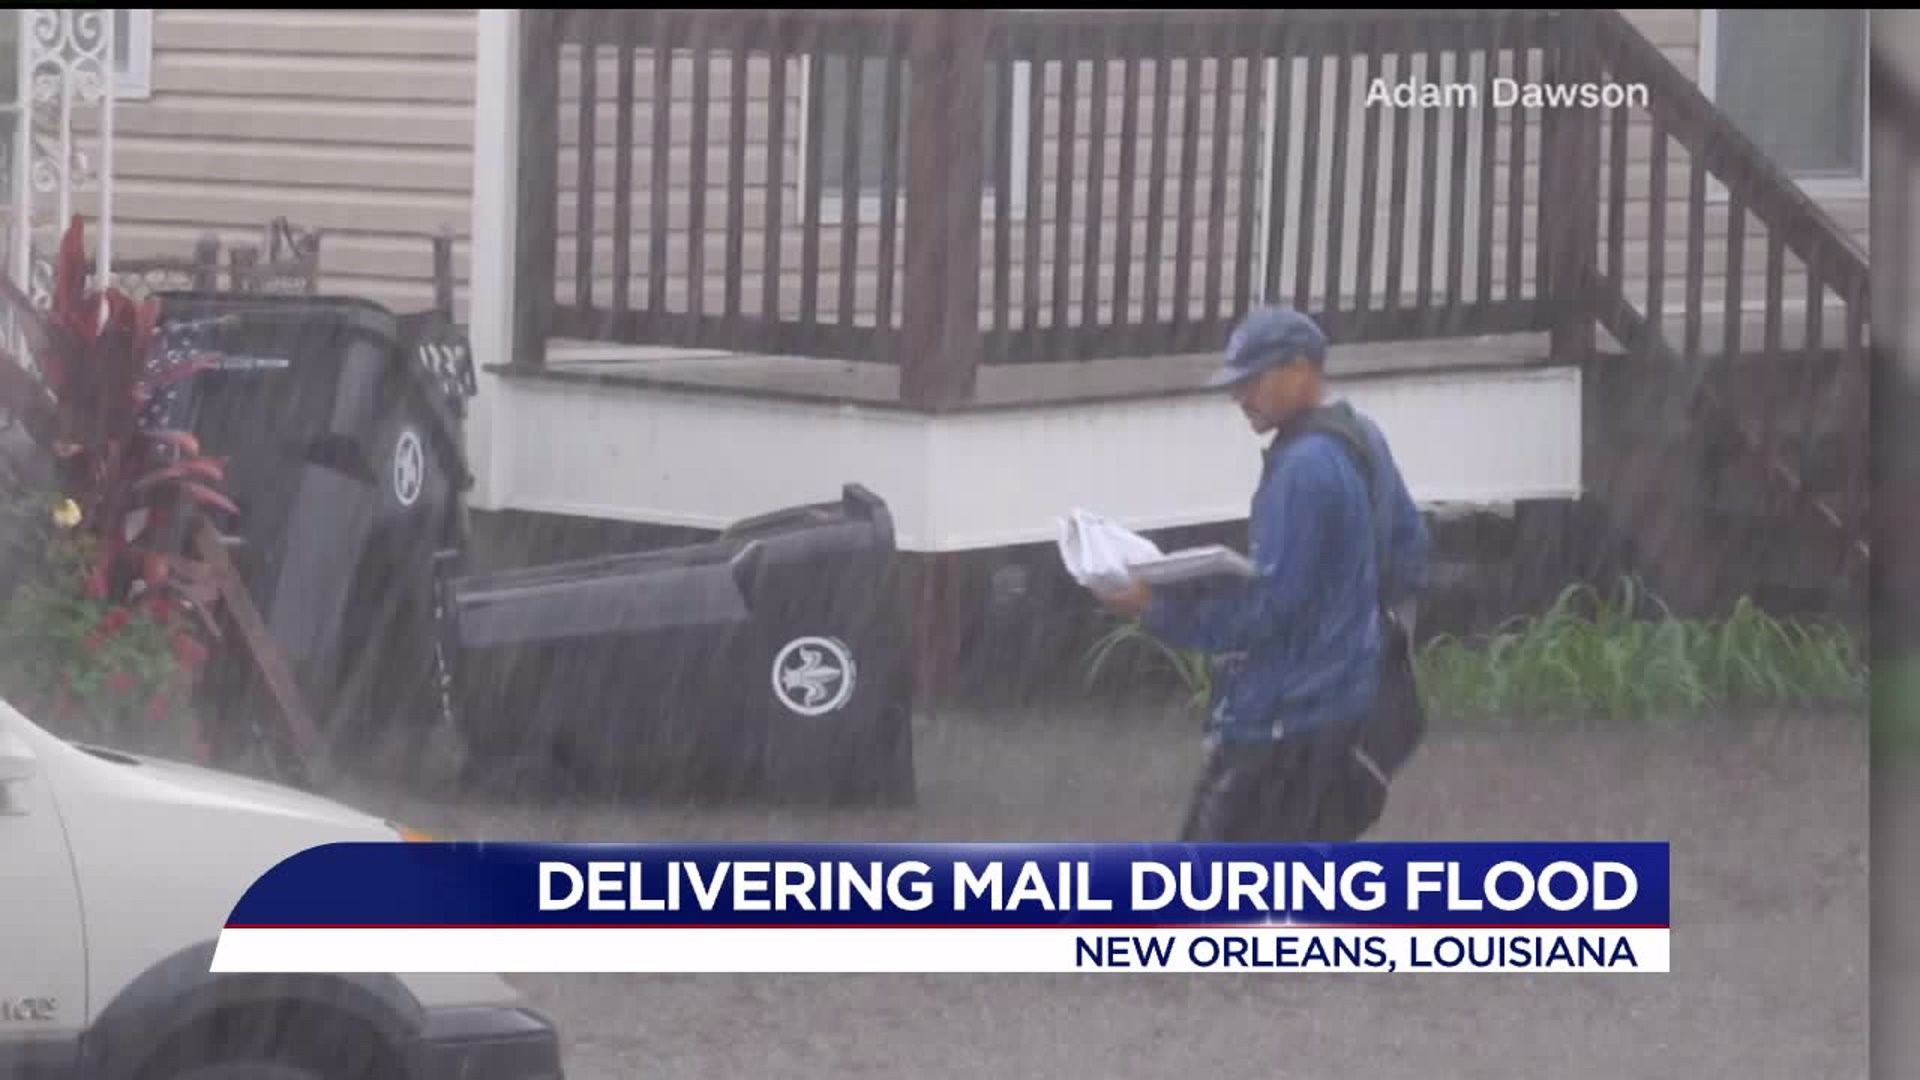 Rain, sleet or floodwaters, the mail never stops